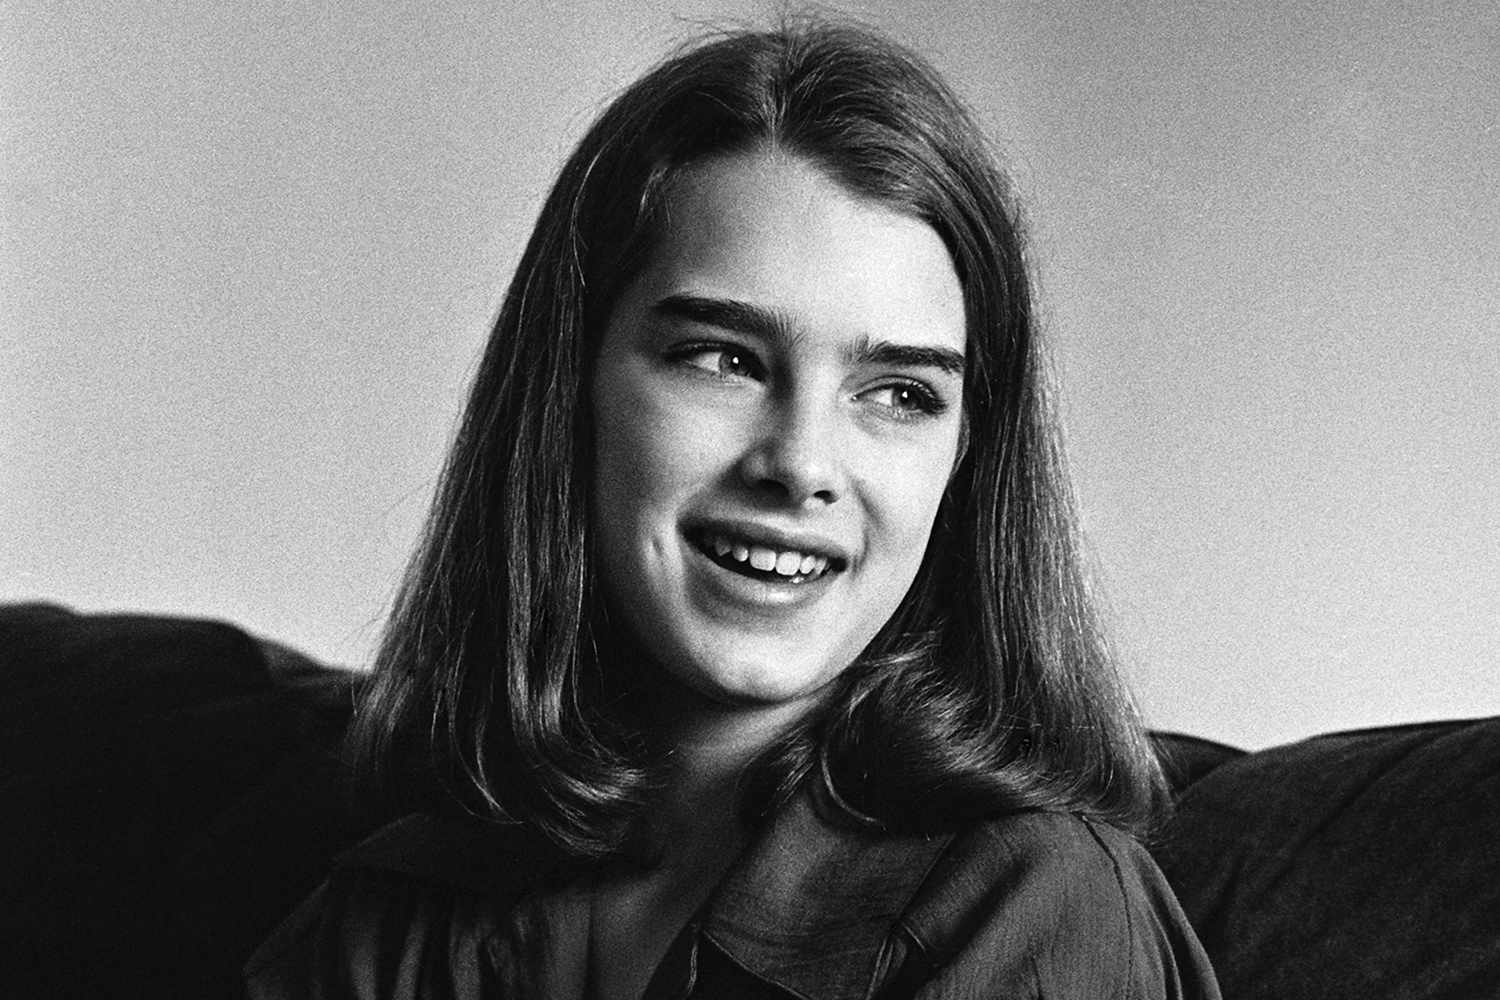 Brooke Shields Was Just 13 on Her Very First PEOPLE Cover. See the Iconic Moment as the Star Turns 59